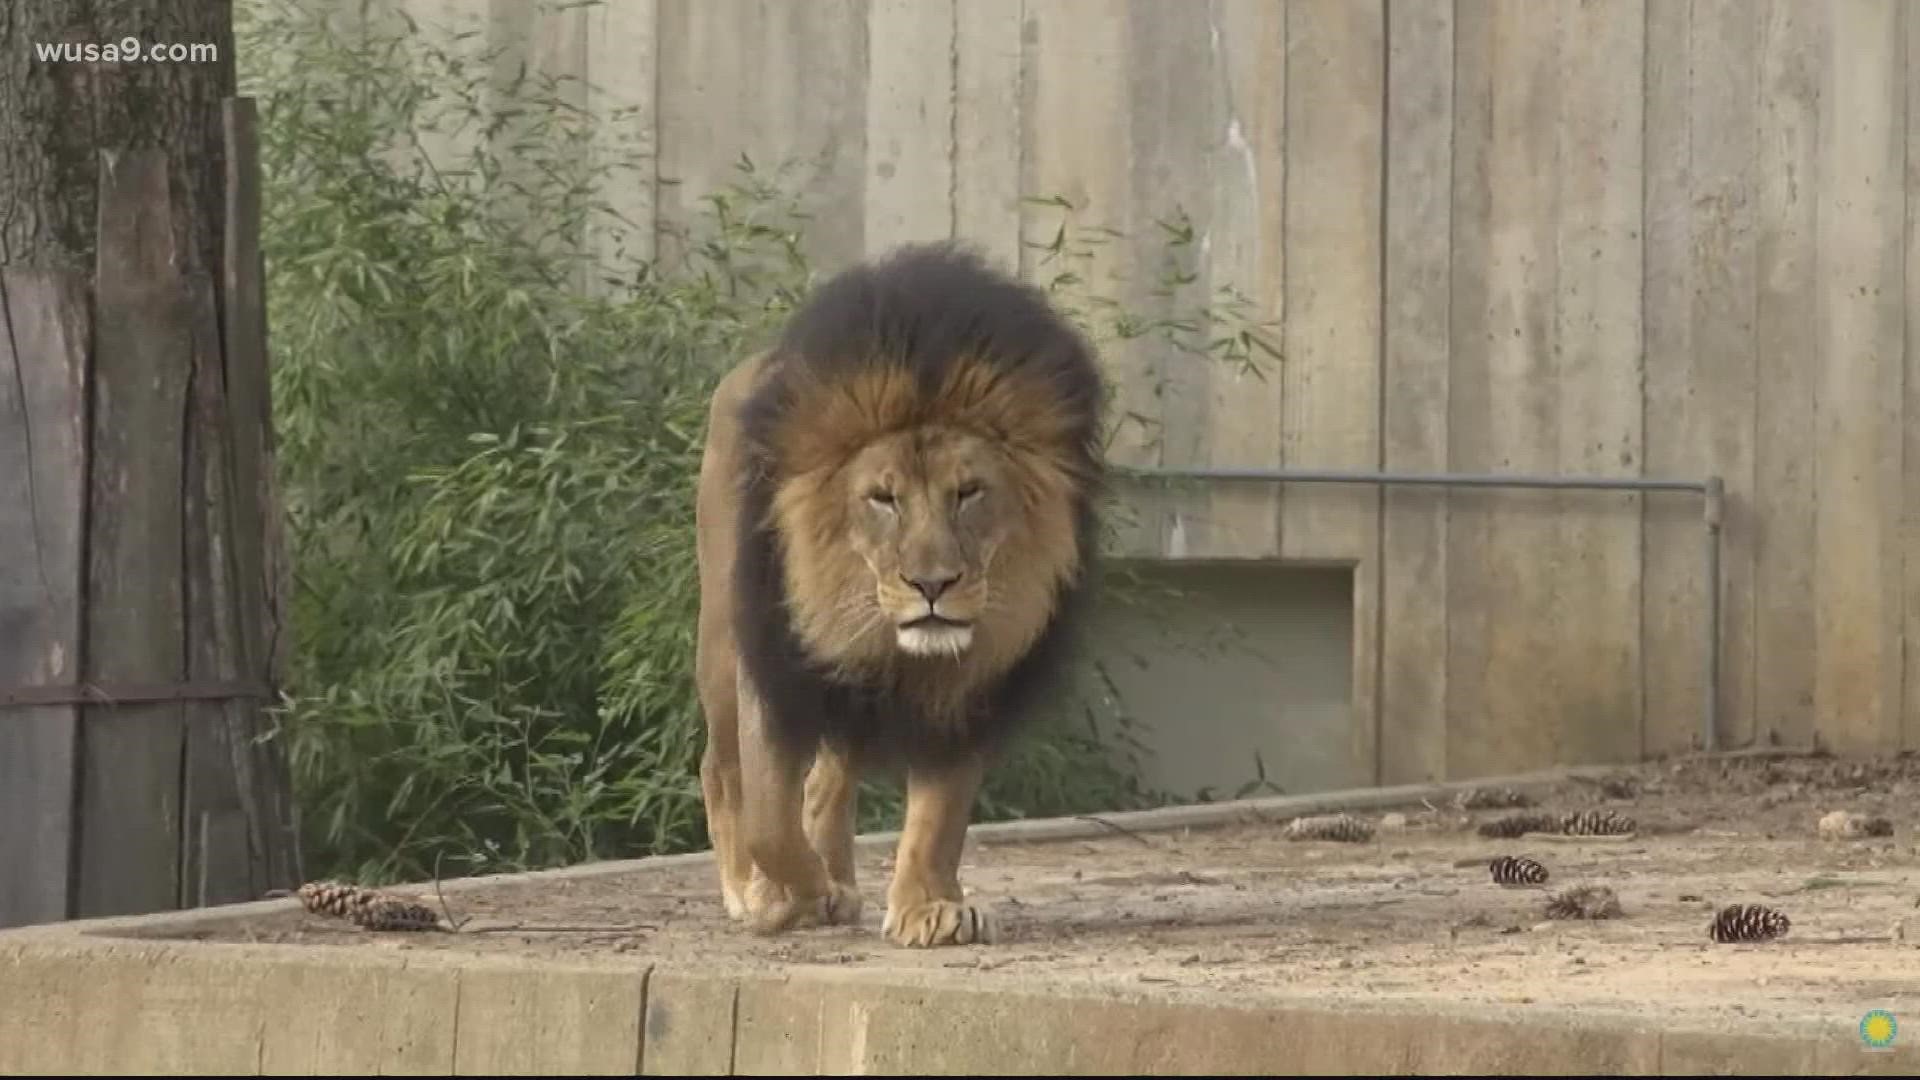 Six African lions, a Sumatran tiger and two Amur tigers have tested presumptive positive for the virus that causes COVID-19, zoo officials say.